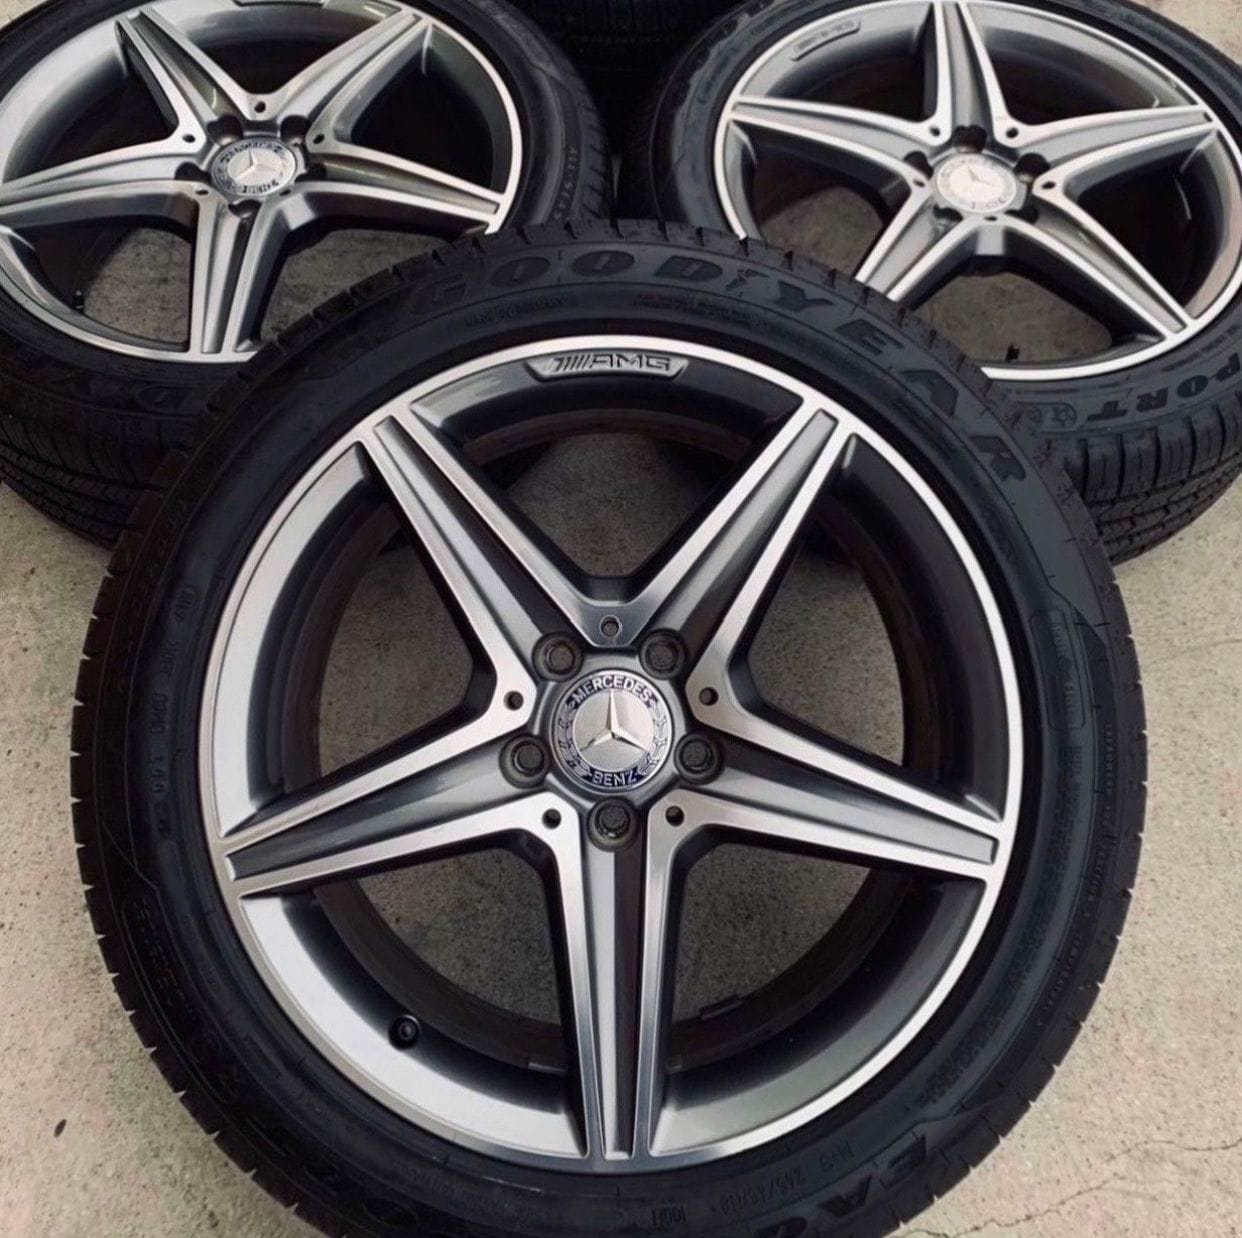 Wheels and Tires/Axles - W213 E300 8x18 Sport Package 5 Spoke AMG Wheels with GoodYear Eagle F1 Runflat Tires - Used - 2017 to 2021 Mercedes-Benz E300 - Beverly Hills, CA 90210, United States